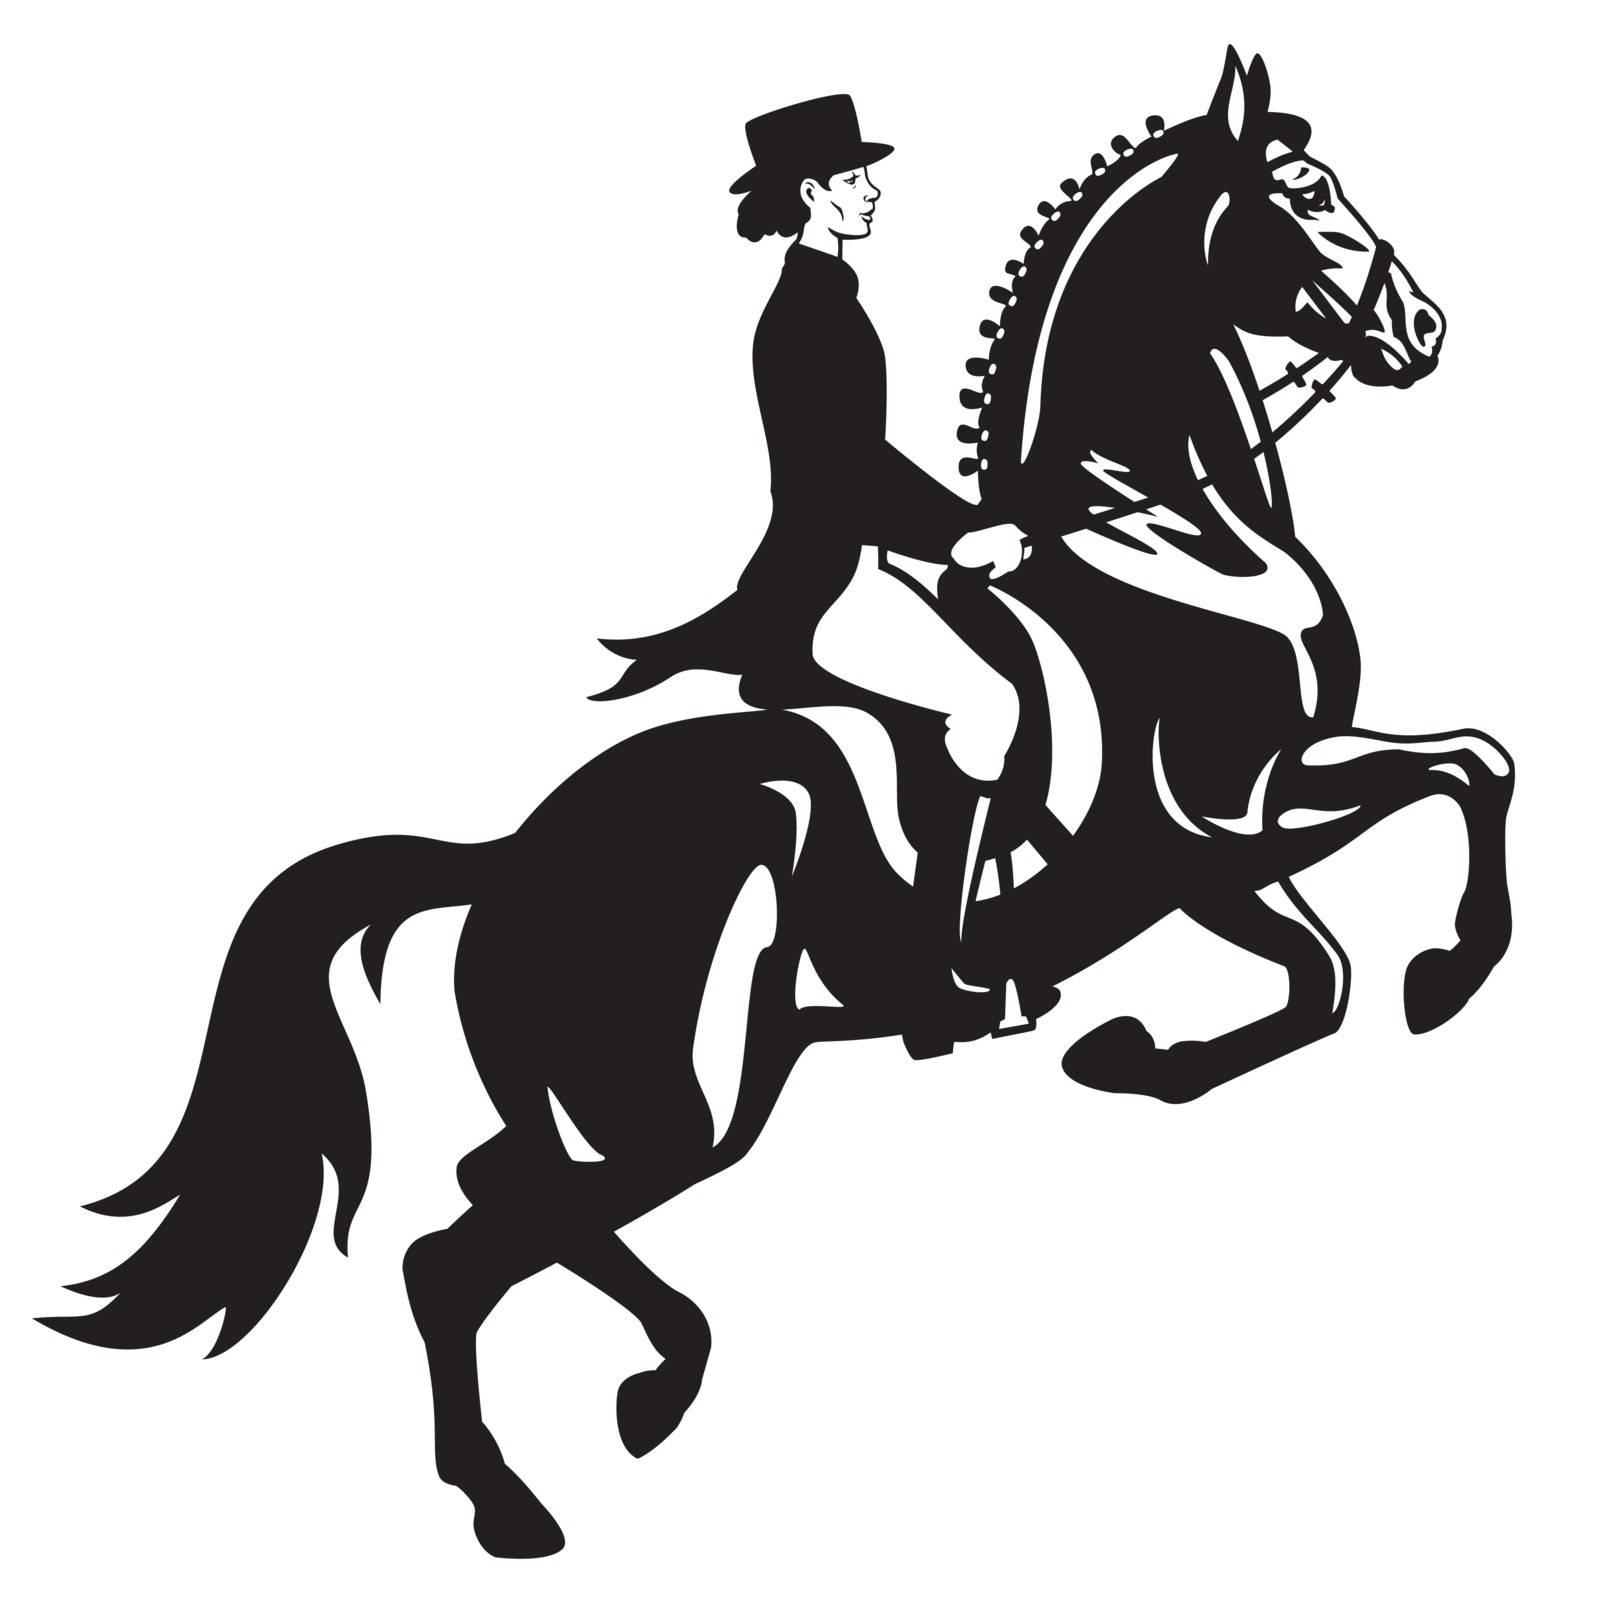 horse rider, dressage equestrian sport, black and white side view image